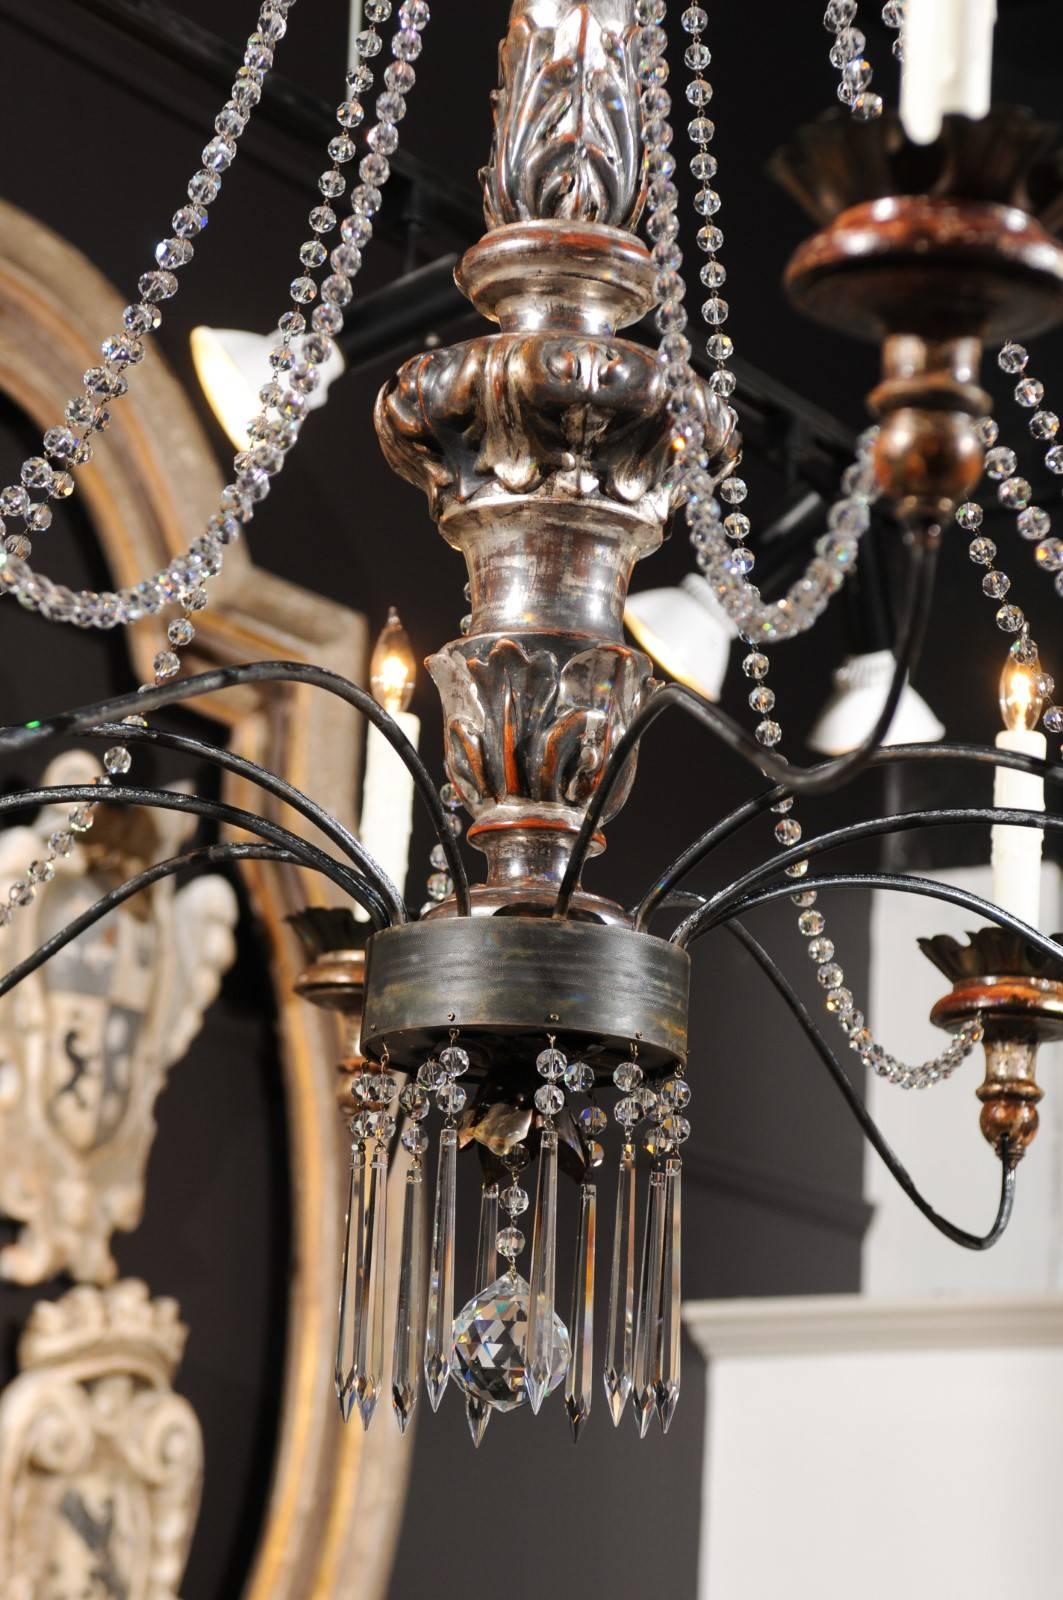 Large Ten-Light Wood and Crystal Chandelier Made of 19th Century Italian Pricket 1